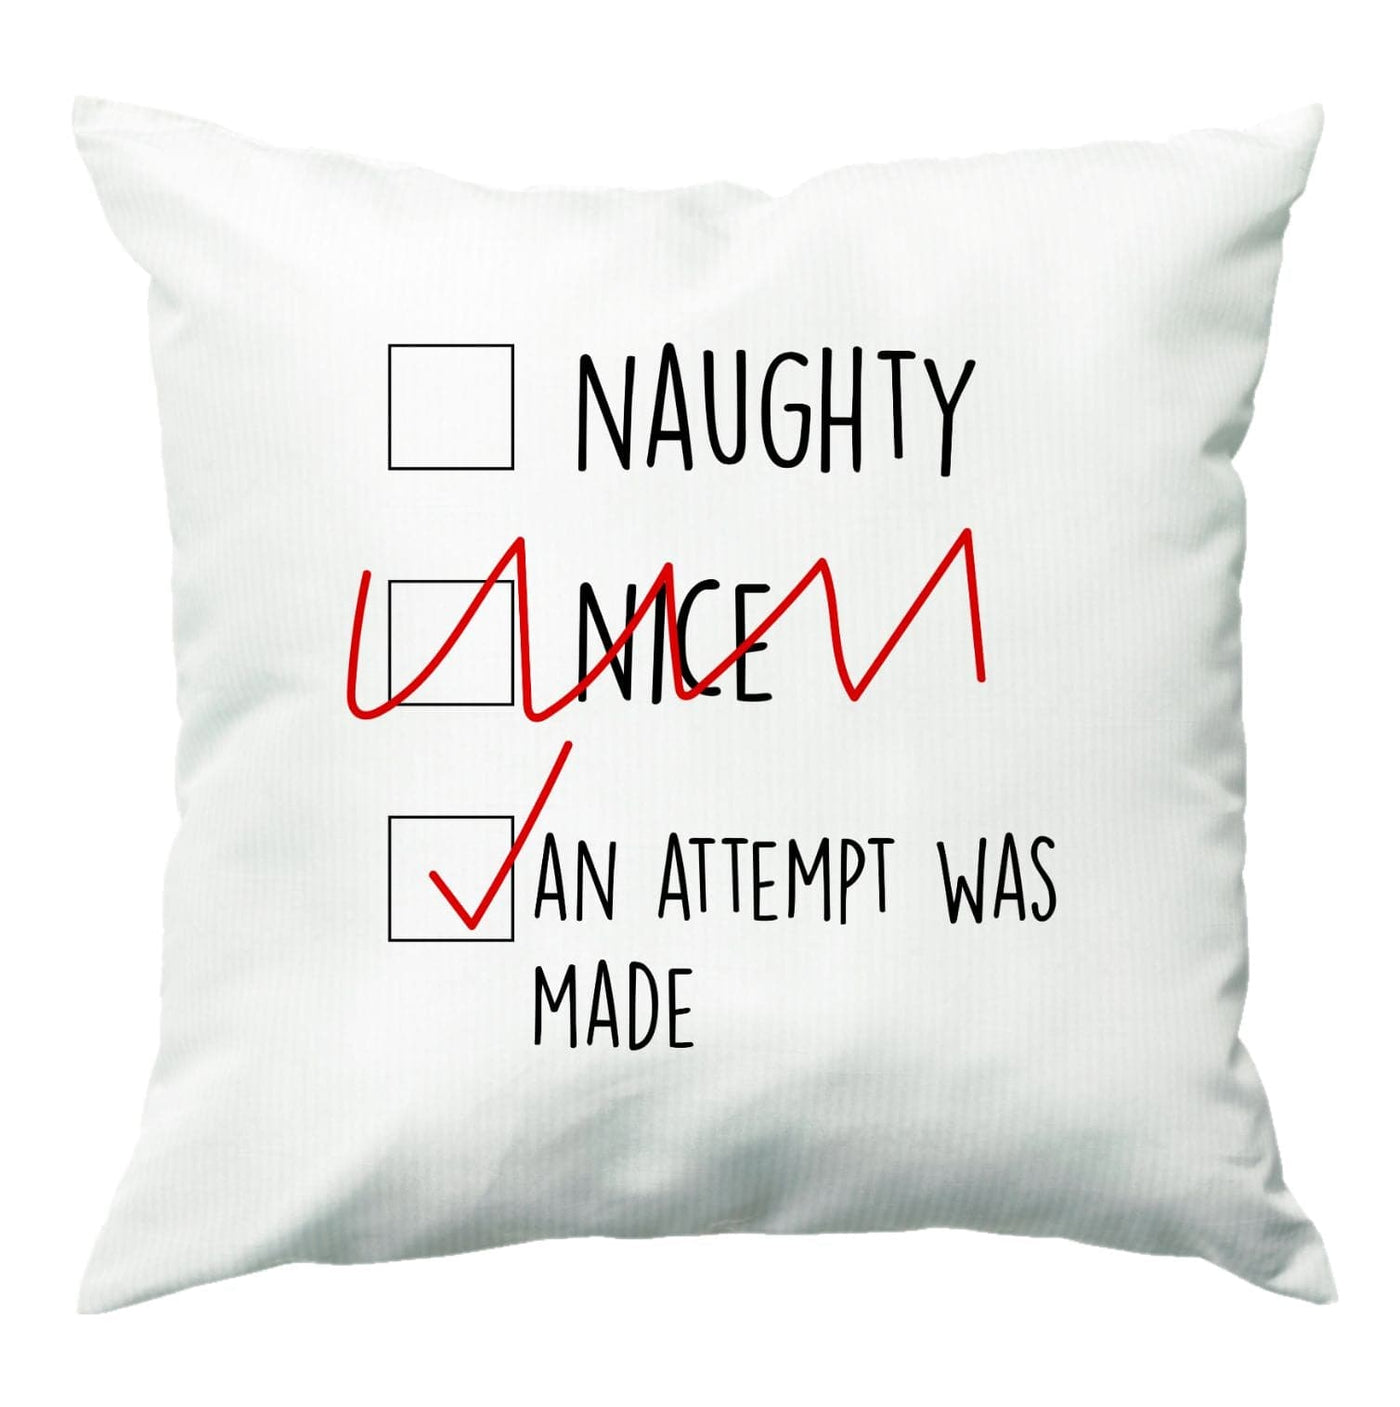 An Attempt Was Made - Naughty Or Nice  Cushion